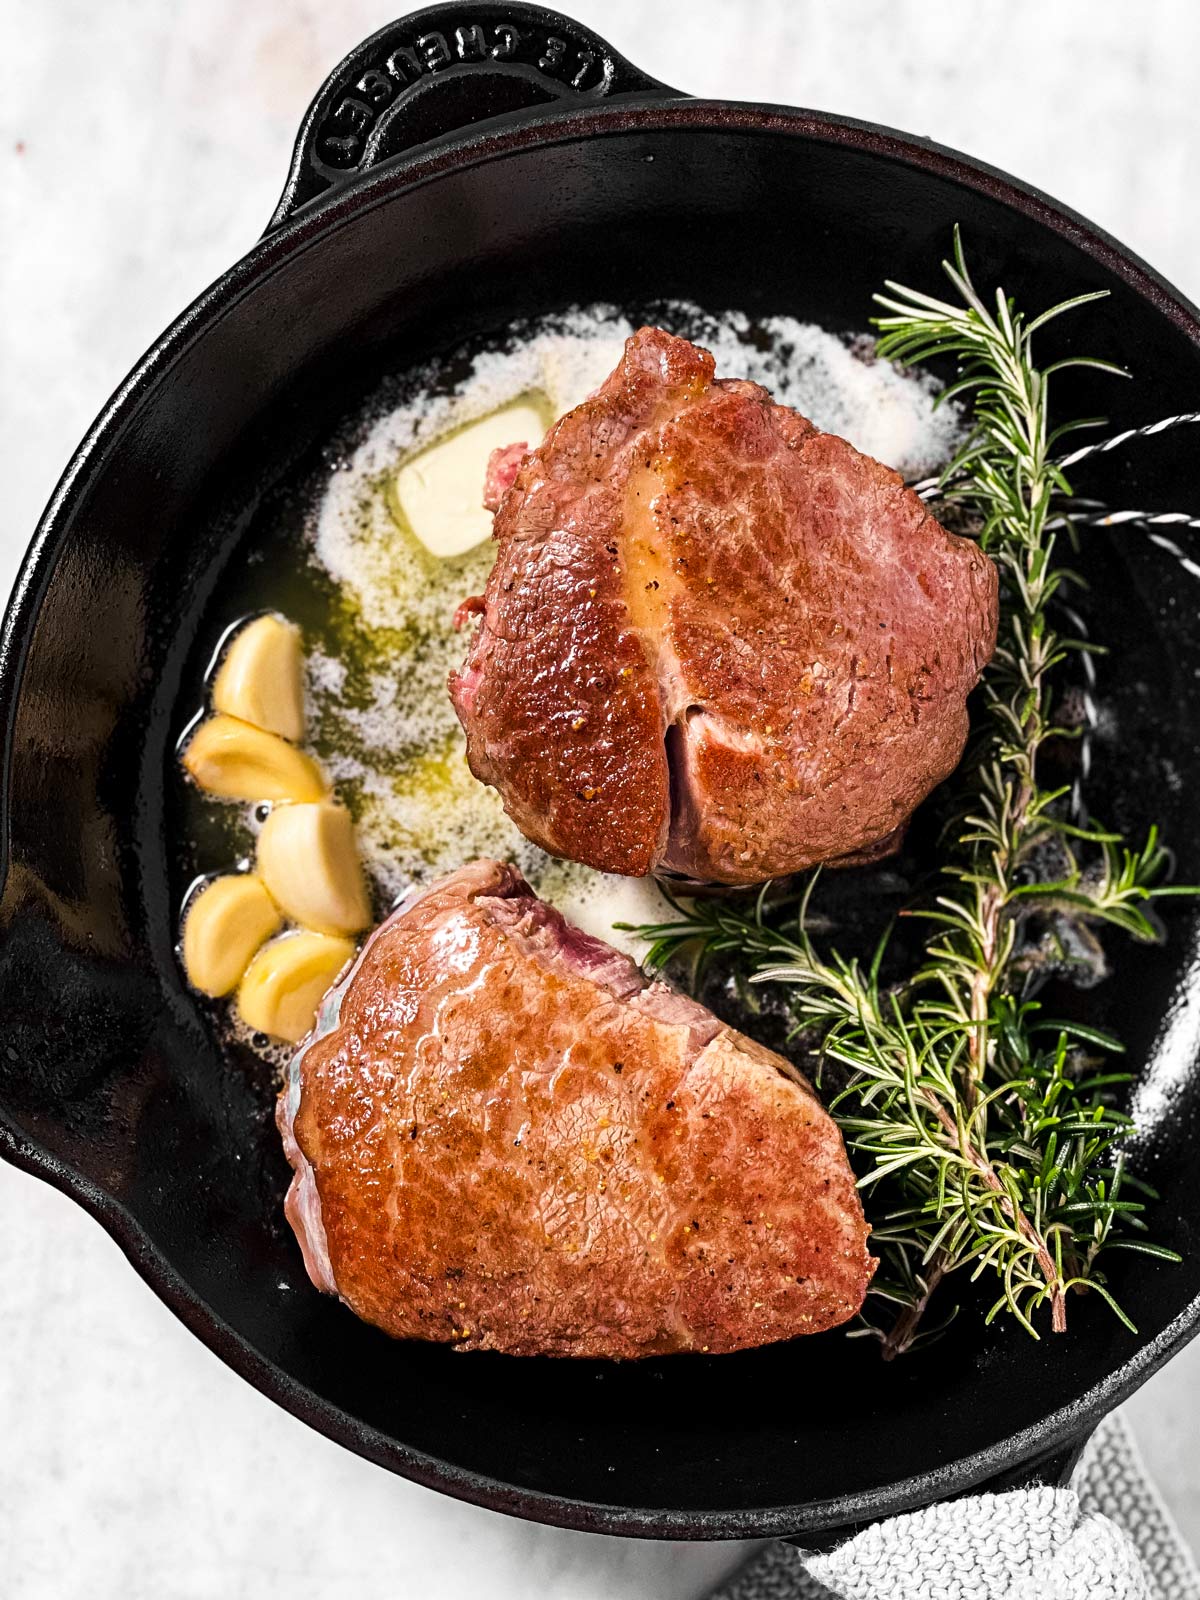 two seared filet mignon steaks in cast iron skillet with butter, garlic and rosemary sprigs